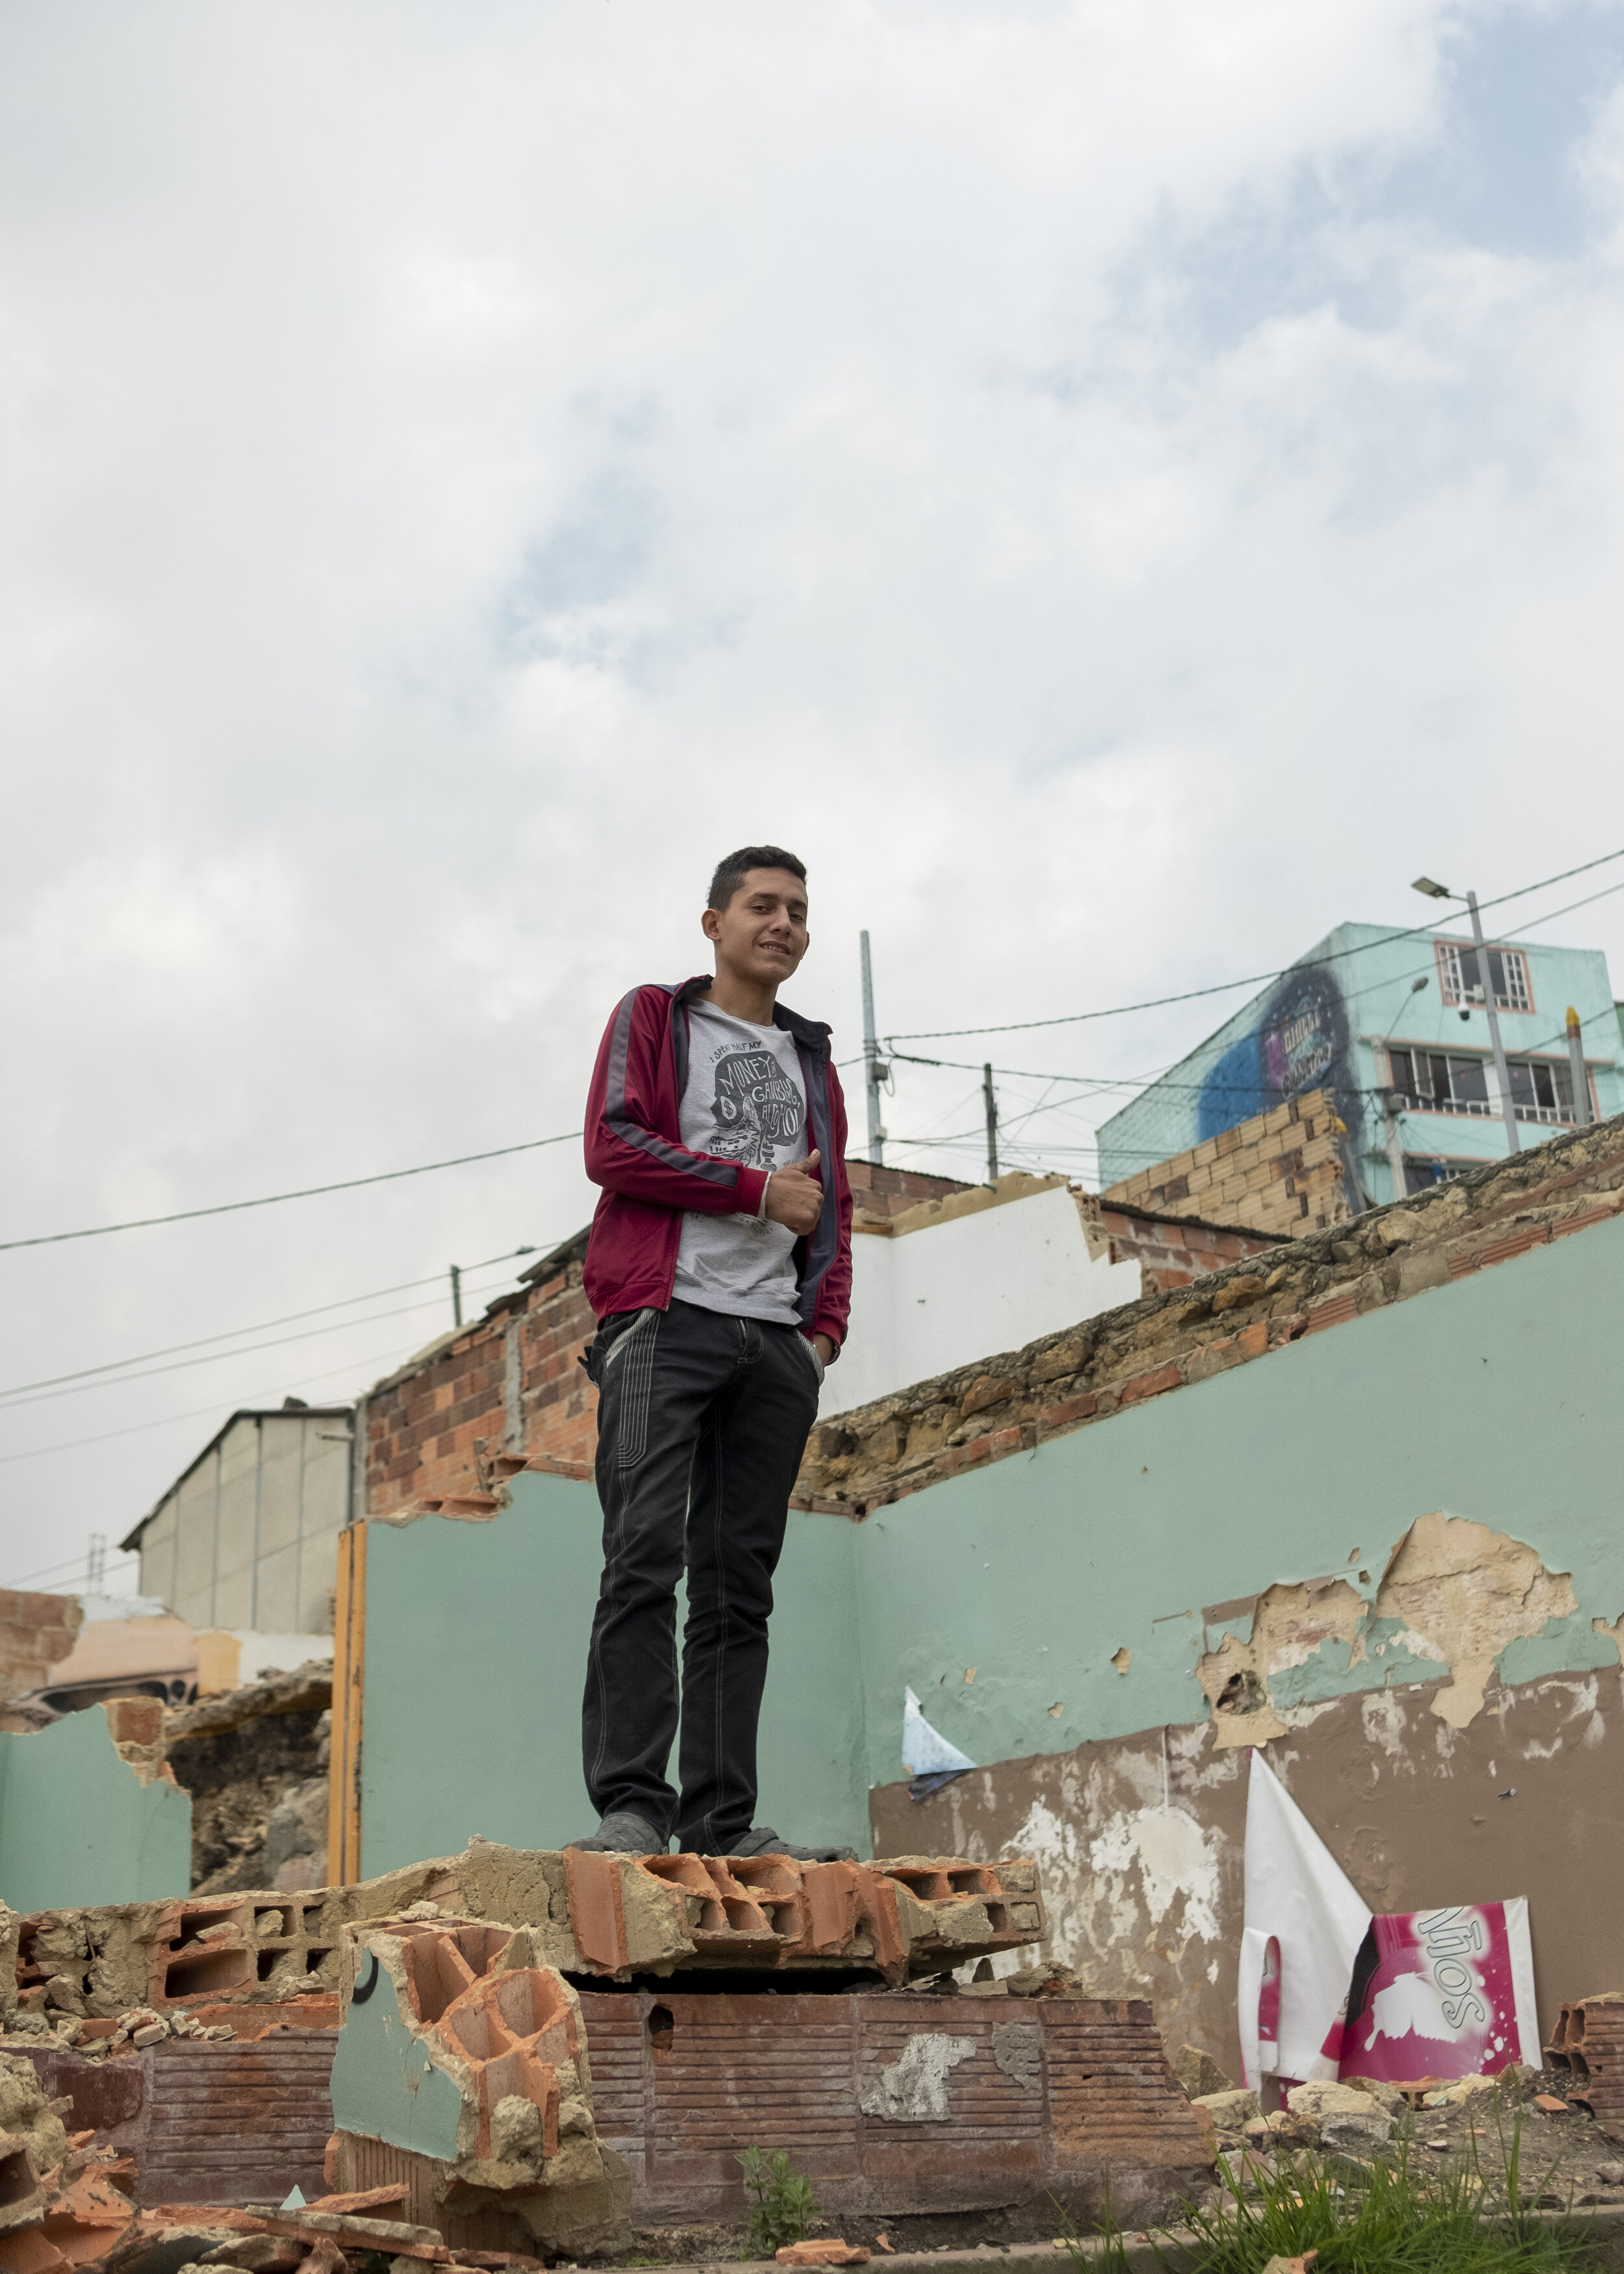  Mibzar, standing on the foundation of a home in El Paraiso, Bogotá.  